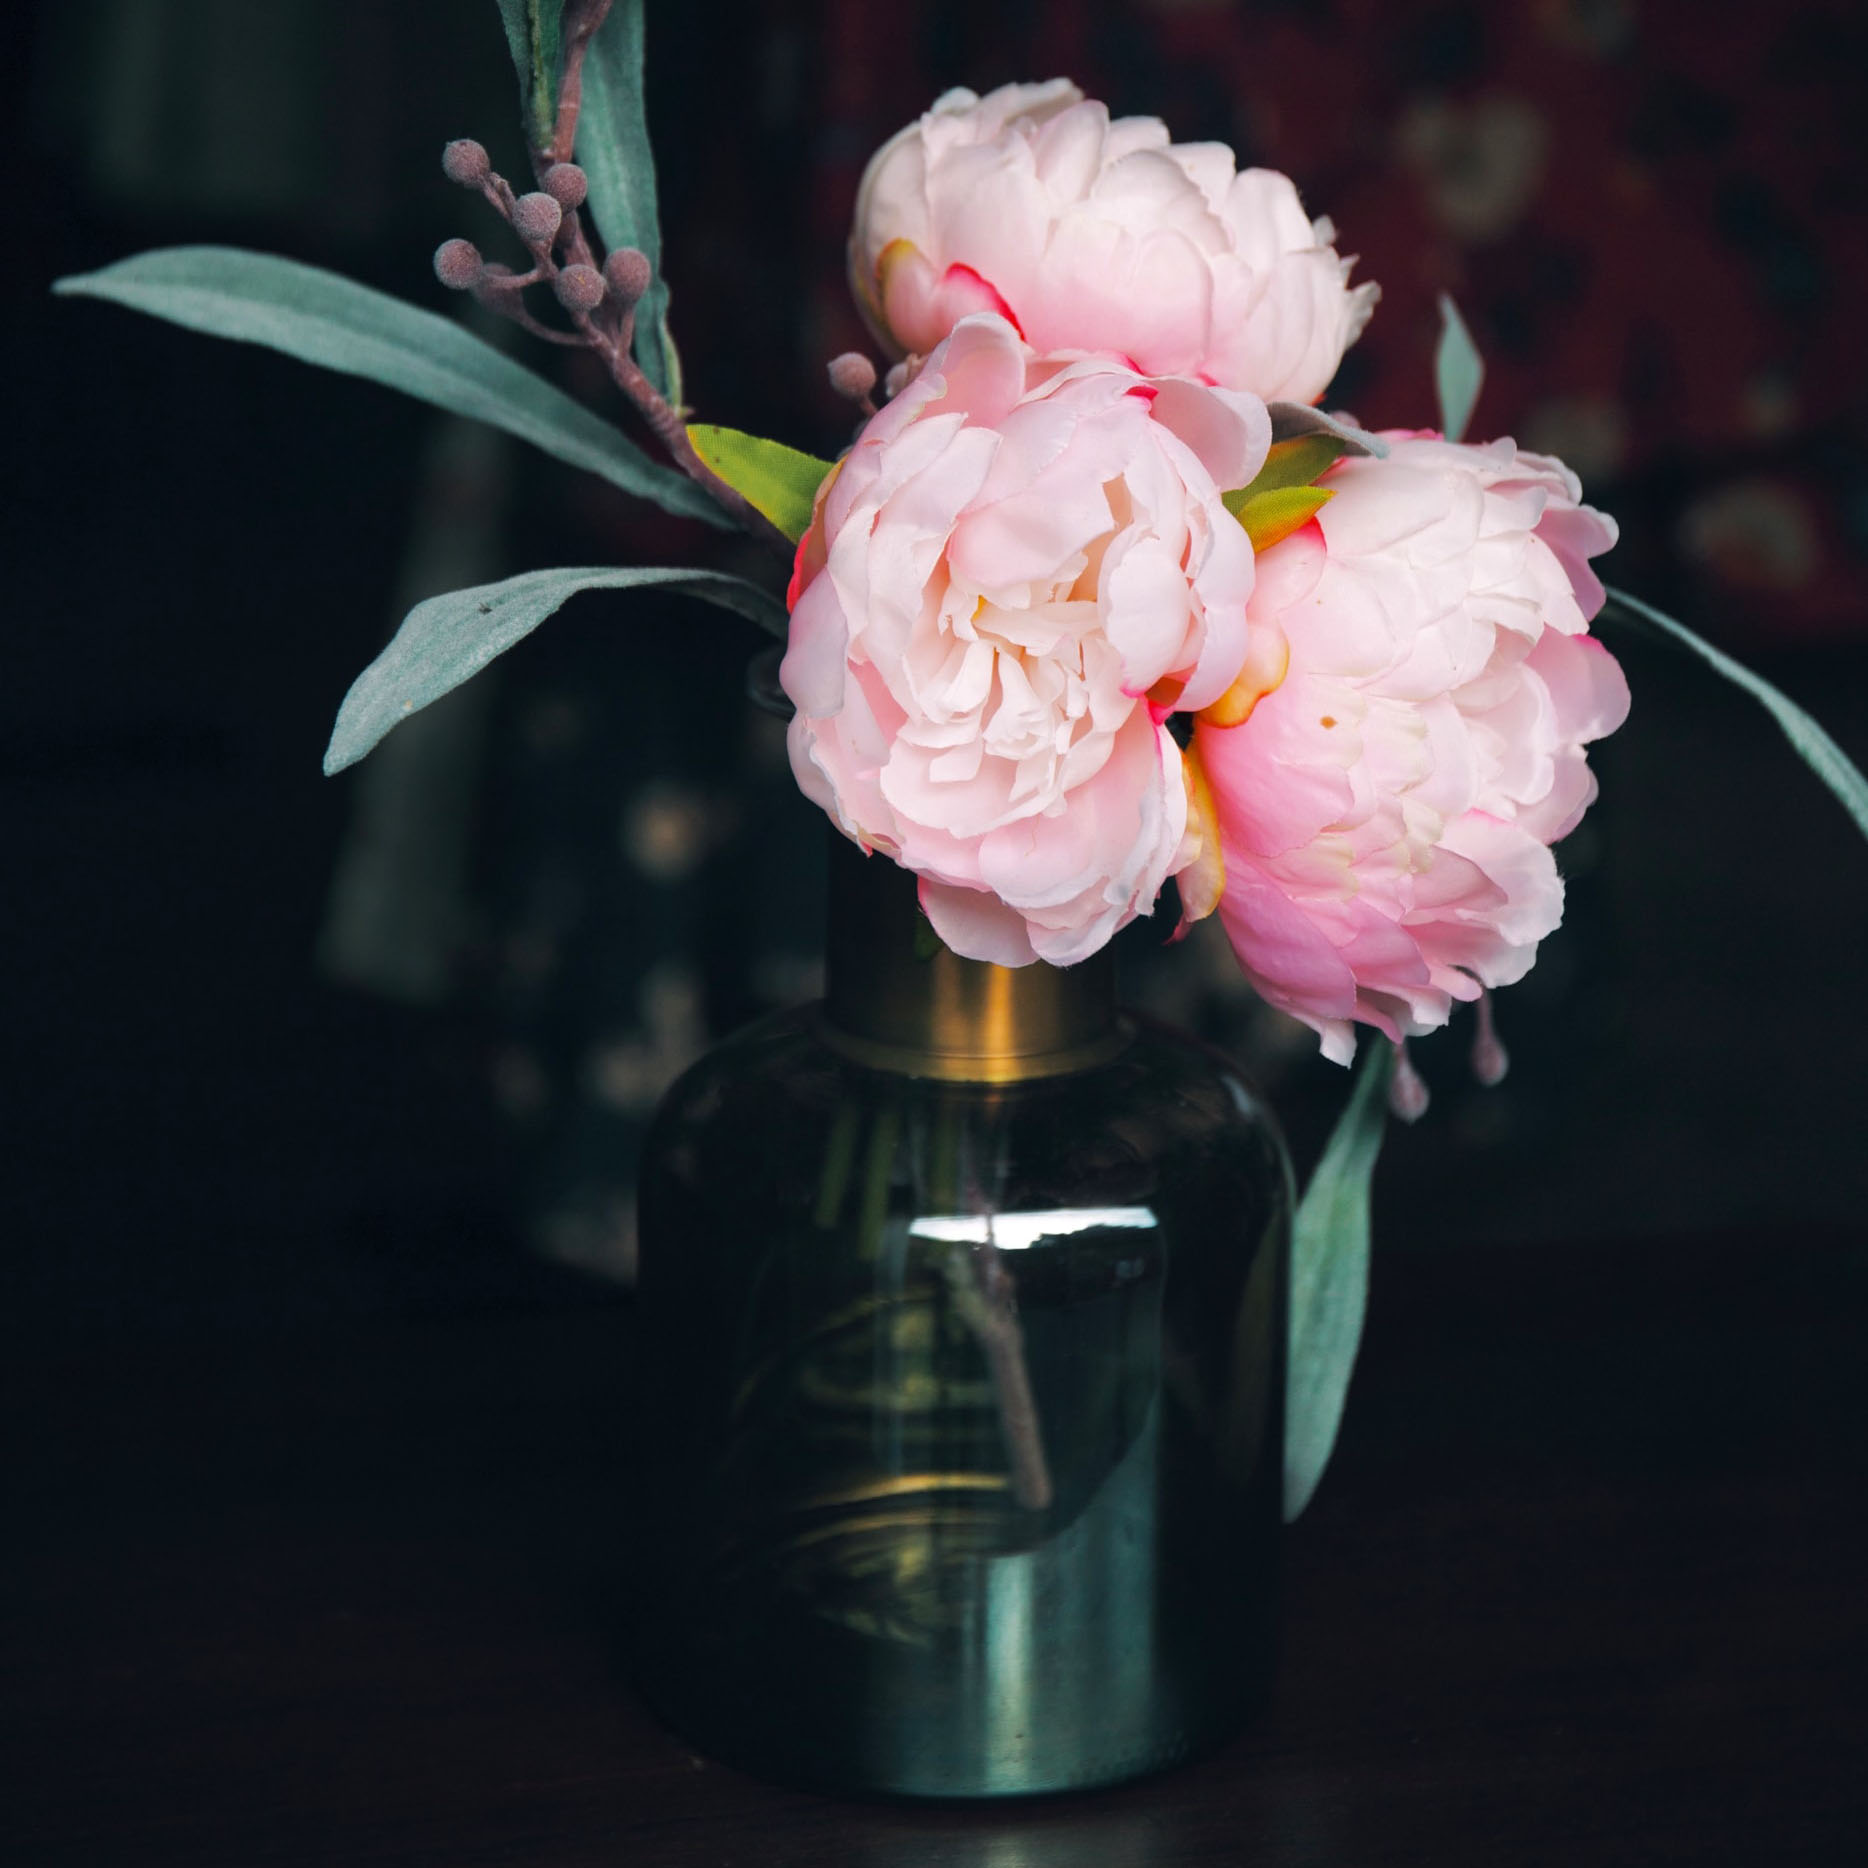 How Do You Get Rid of Bugs on Peonies?